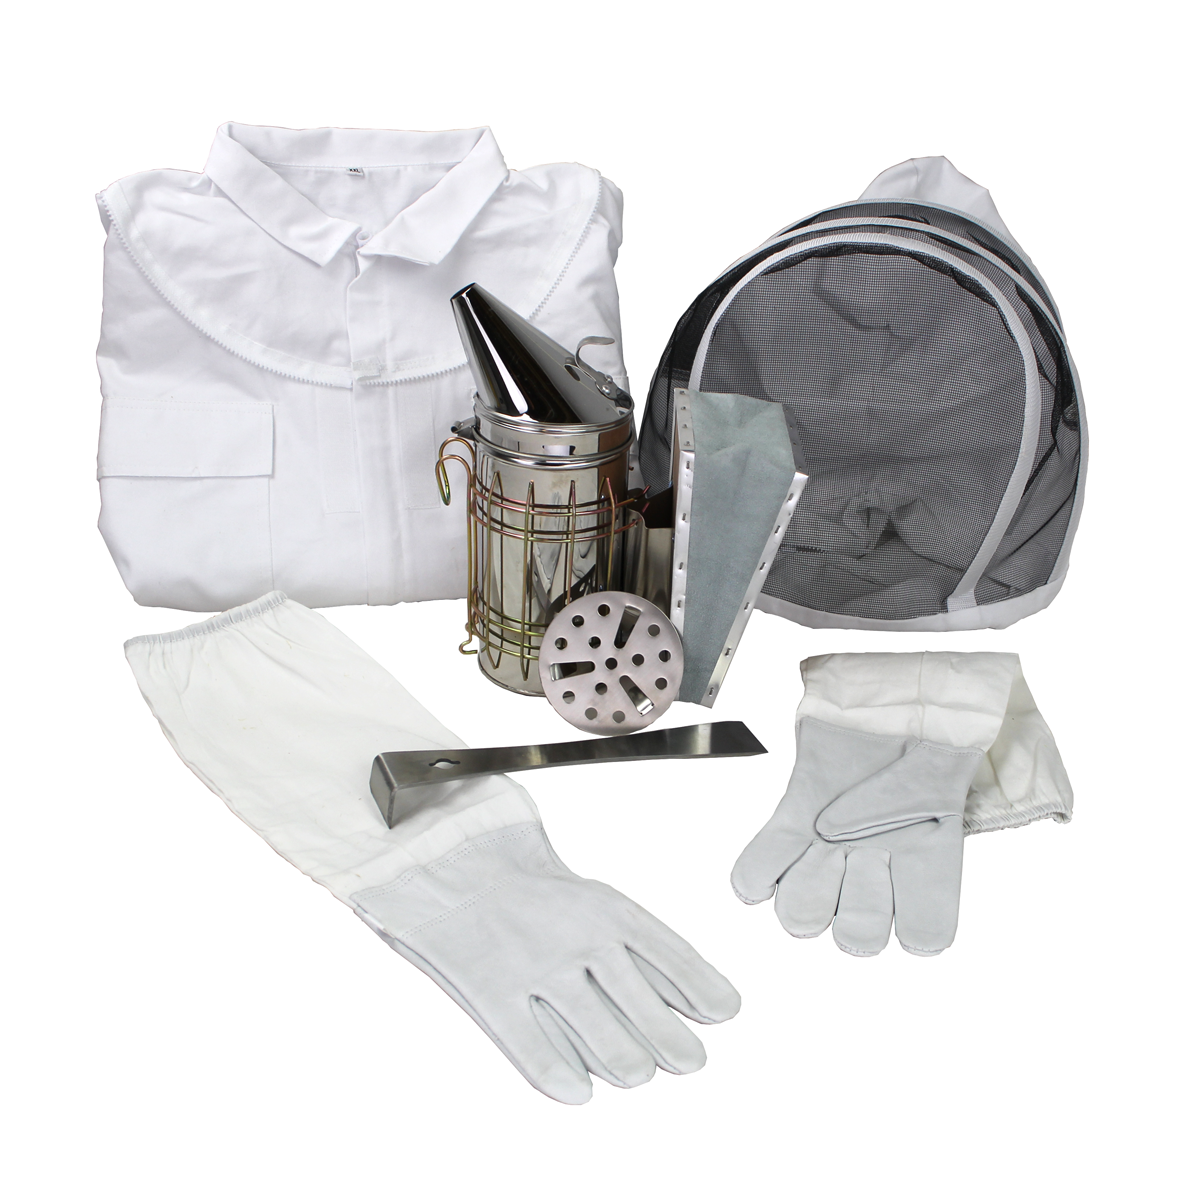 Accessories Package That Include Detachable Veil, Sting Resistant Suit, Leather Gloves, Curled Hive Tool, and Smoker